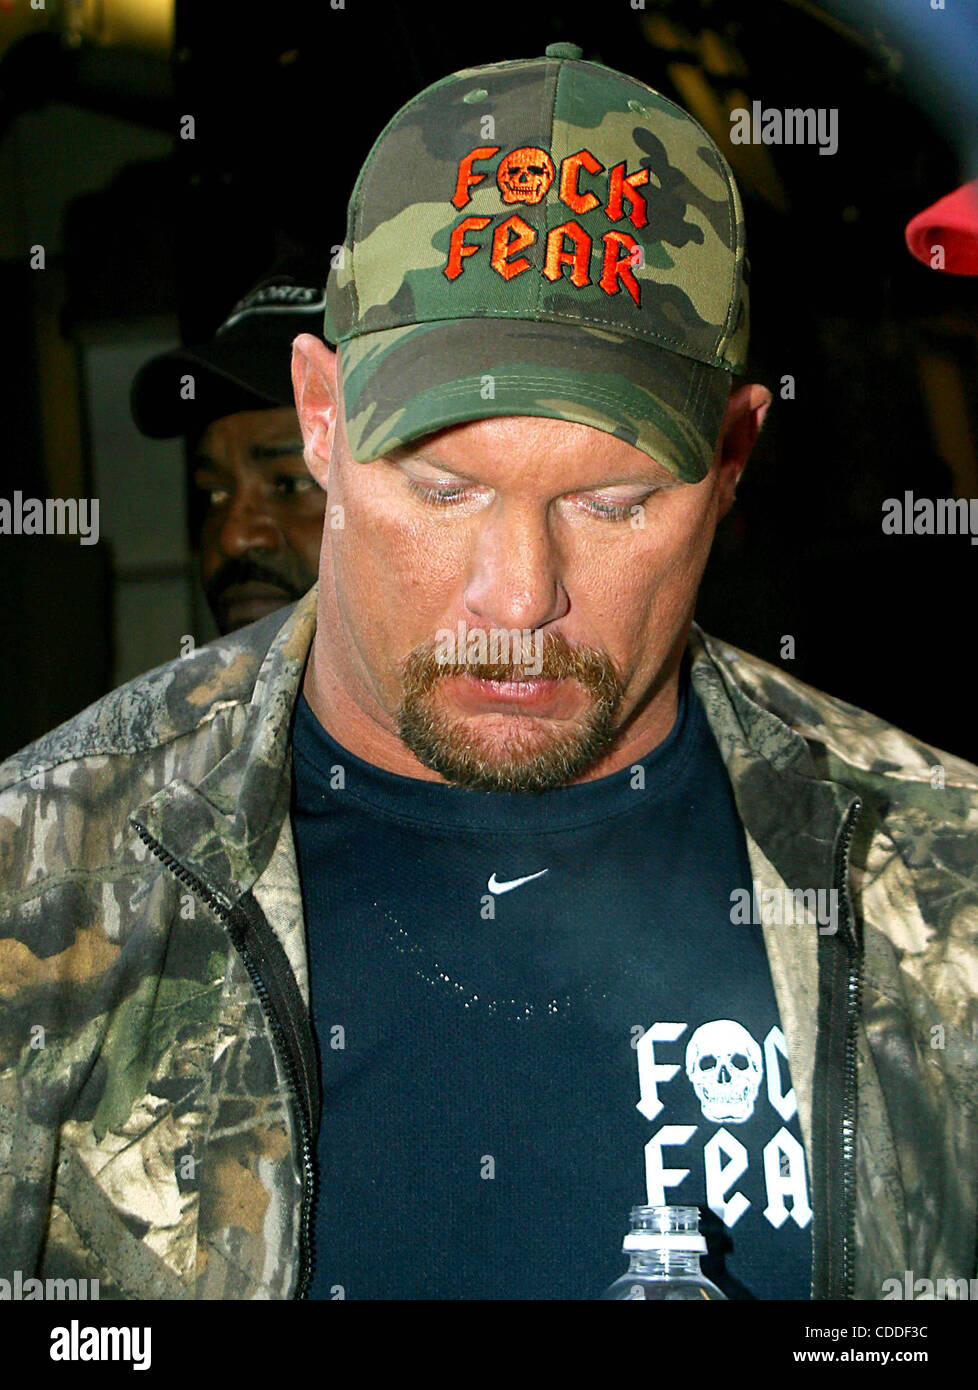 Jan. 1, 2011 - New York, New York, U.S. - K34930RM.STONE COLD STEVE AUSTIN  LEAVING FROM A TAPING OF LIVE WITH REGIS AND KELLY IN NEW YORK New  York.1/14/2004. / 2004.(Credit Image: